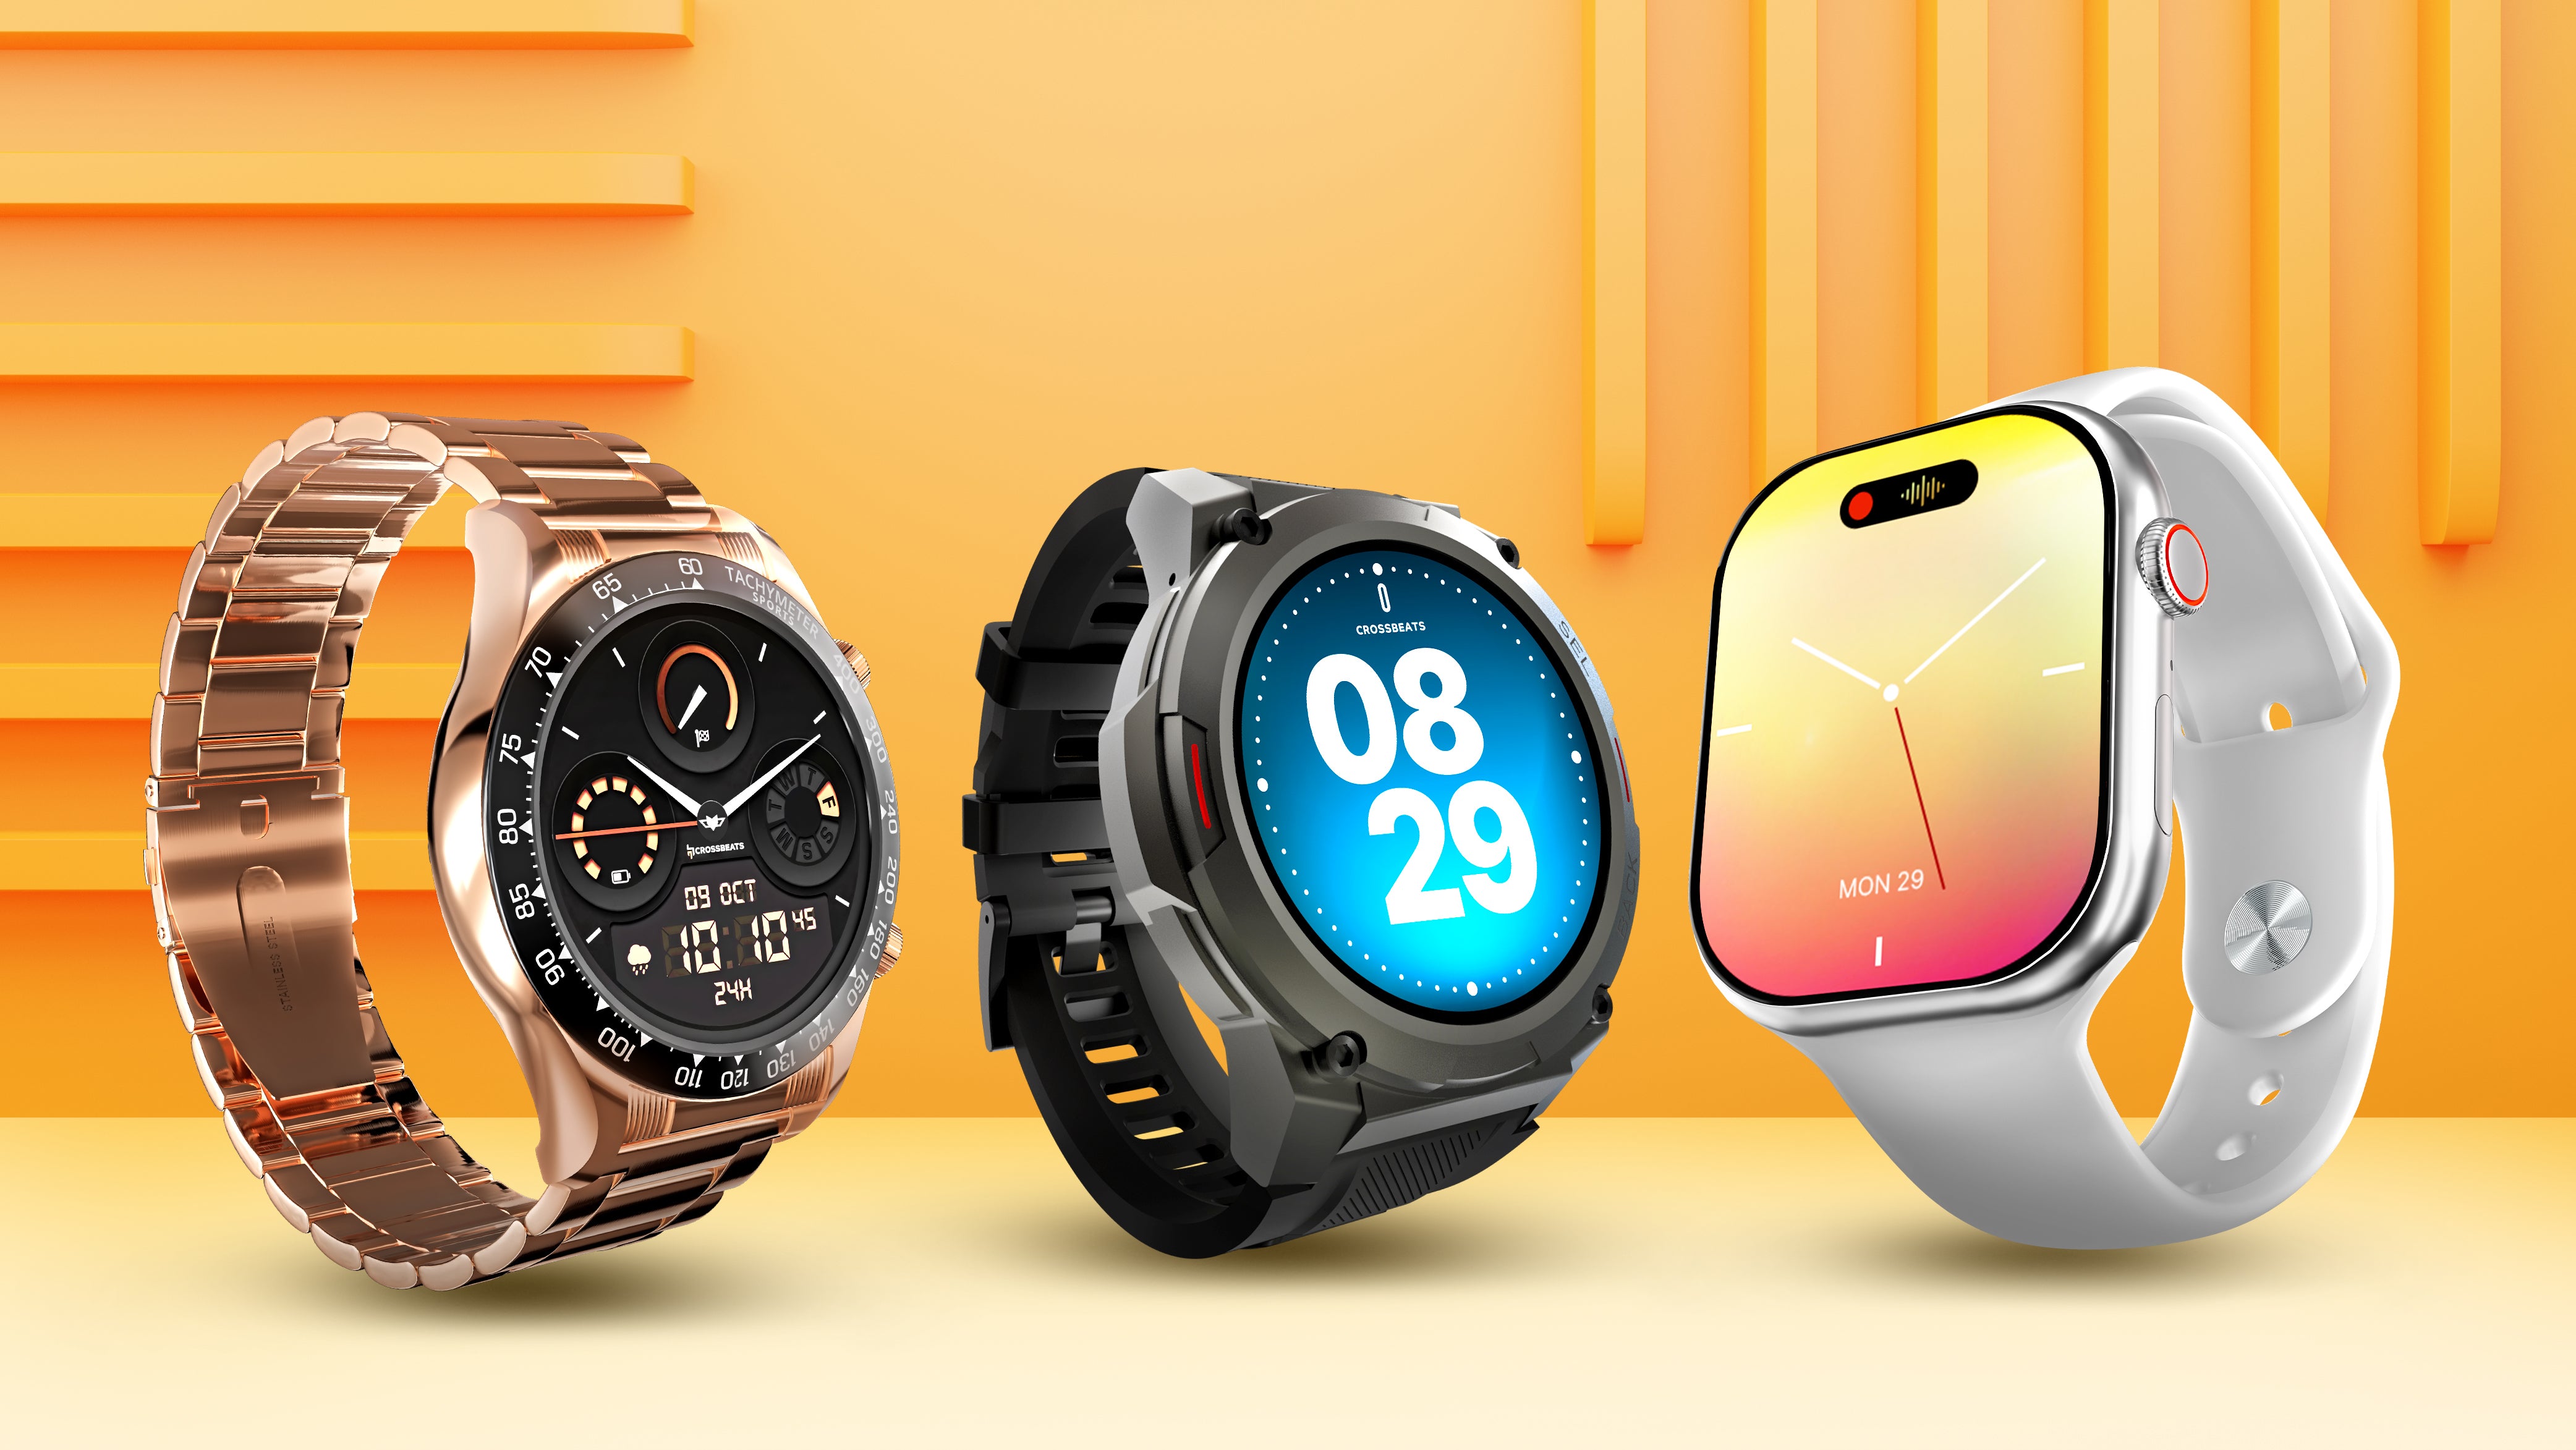 What Factors should one keep in mind while buying a smartwatch?